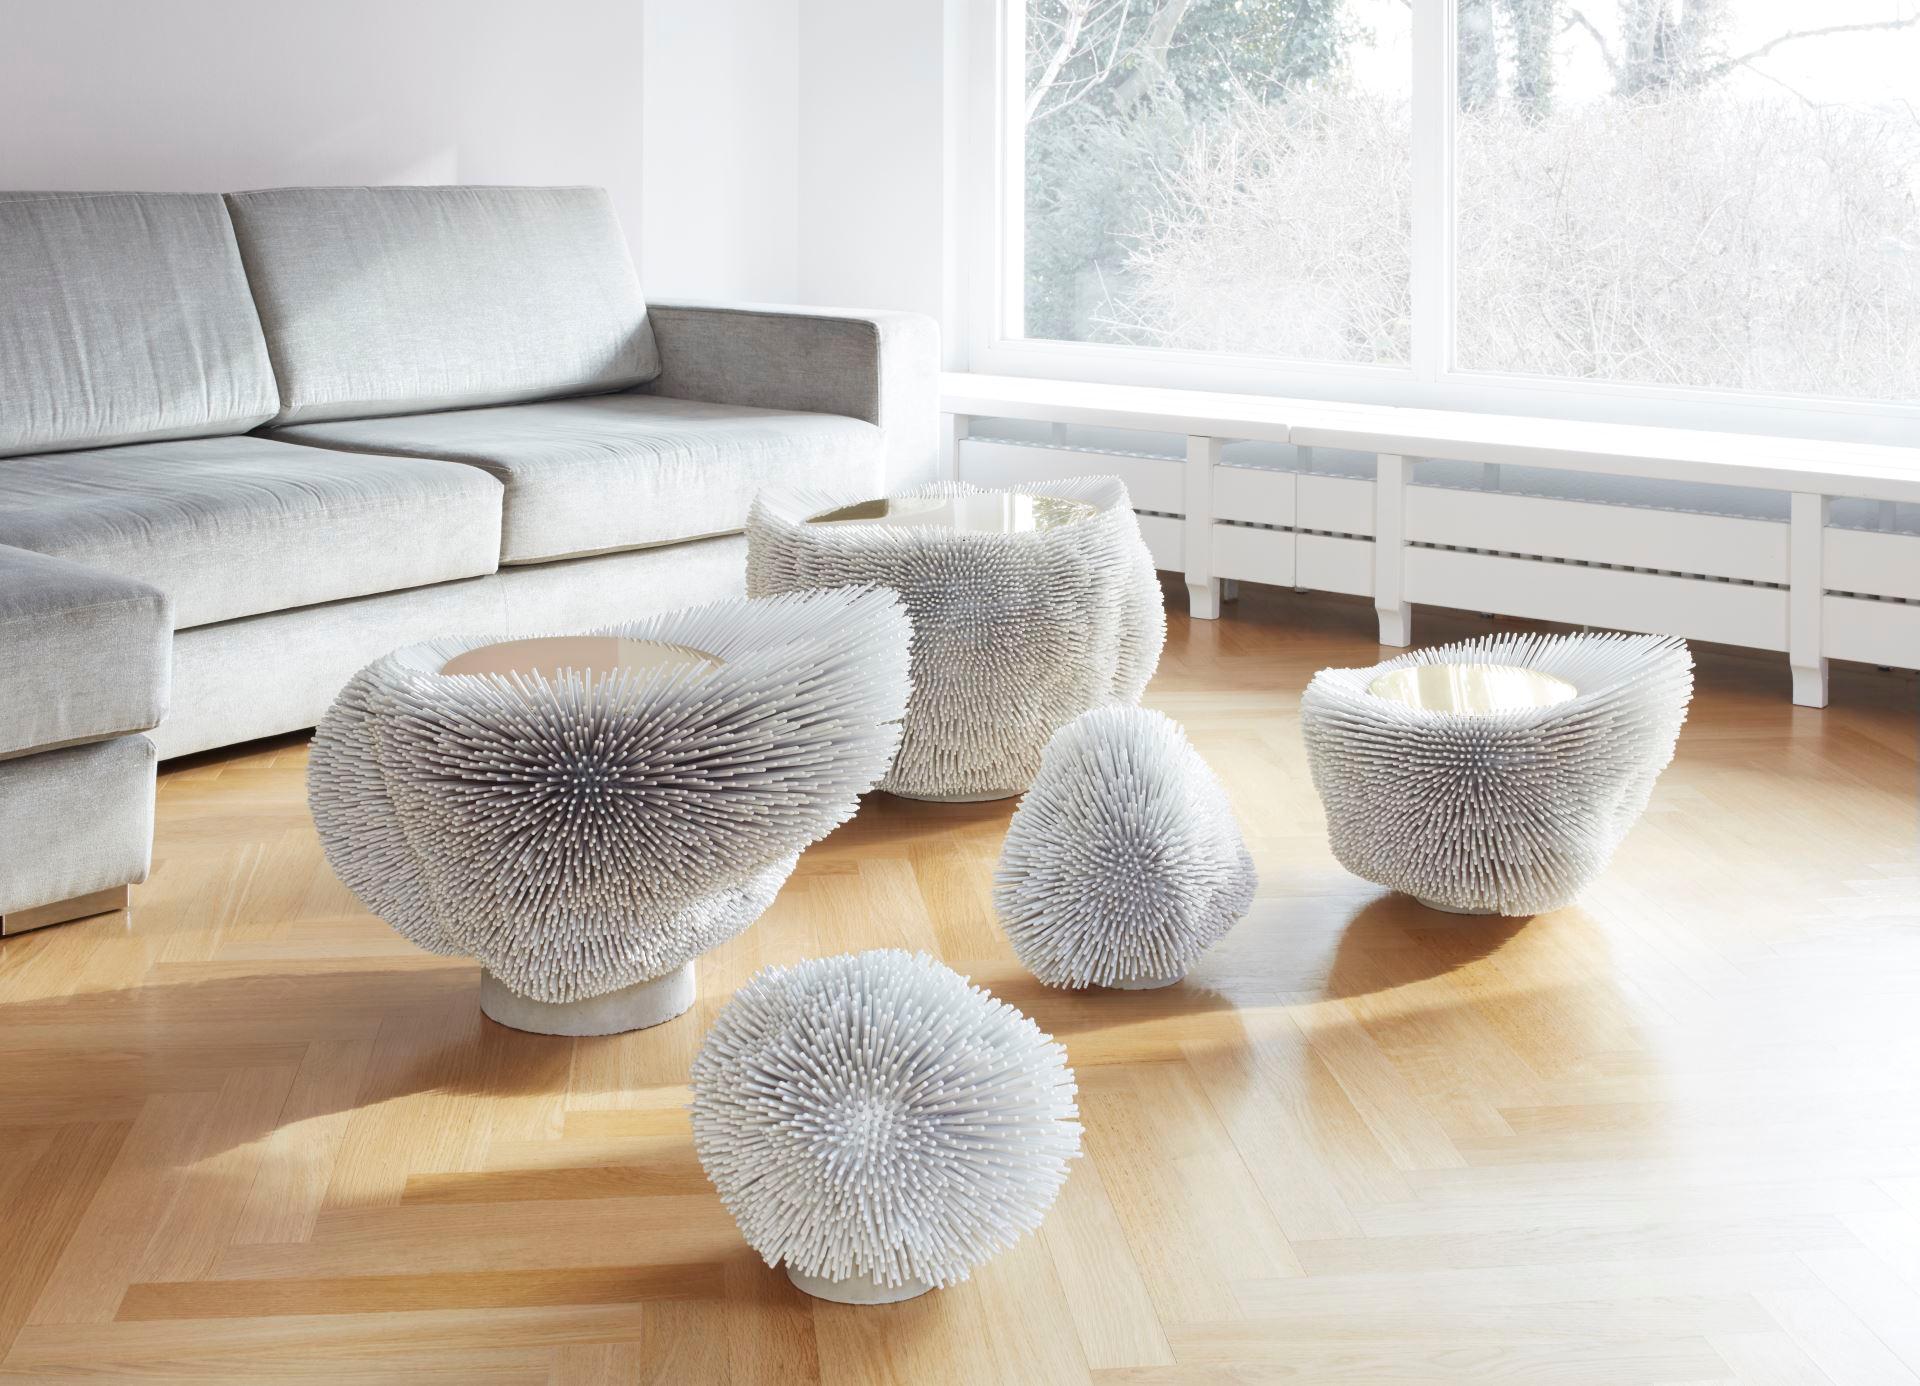 Brushed 'Sea Anemone' Table 'Black' by Pia Maria Raeder